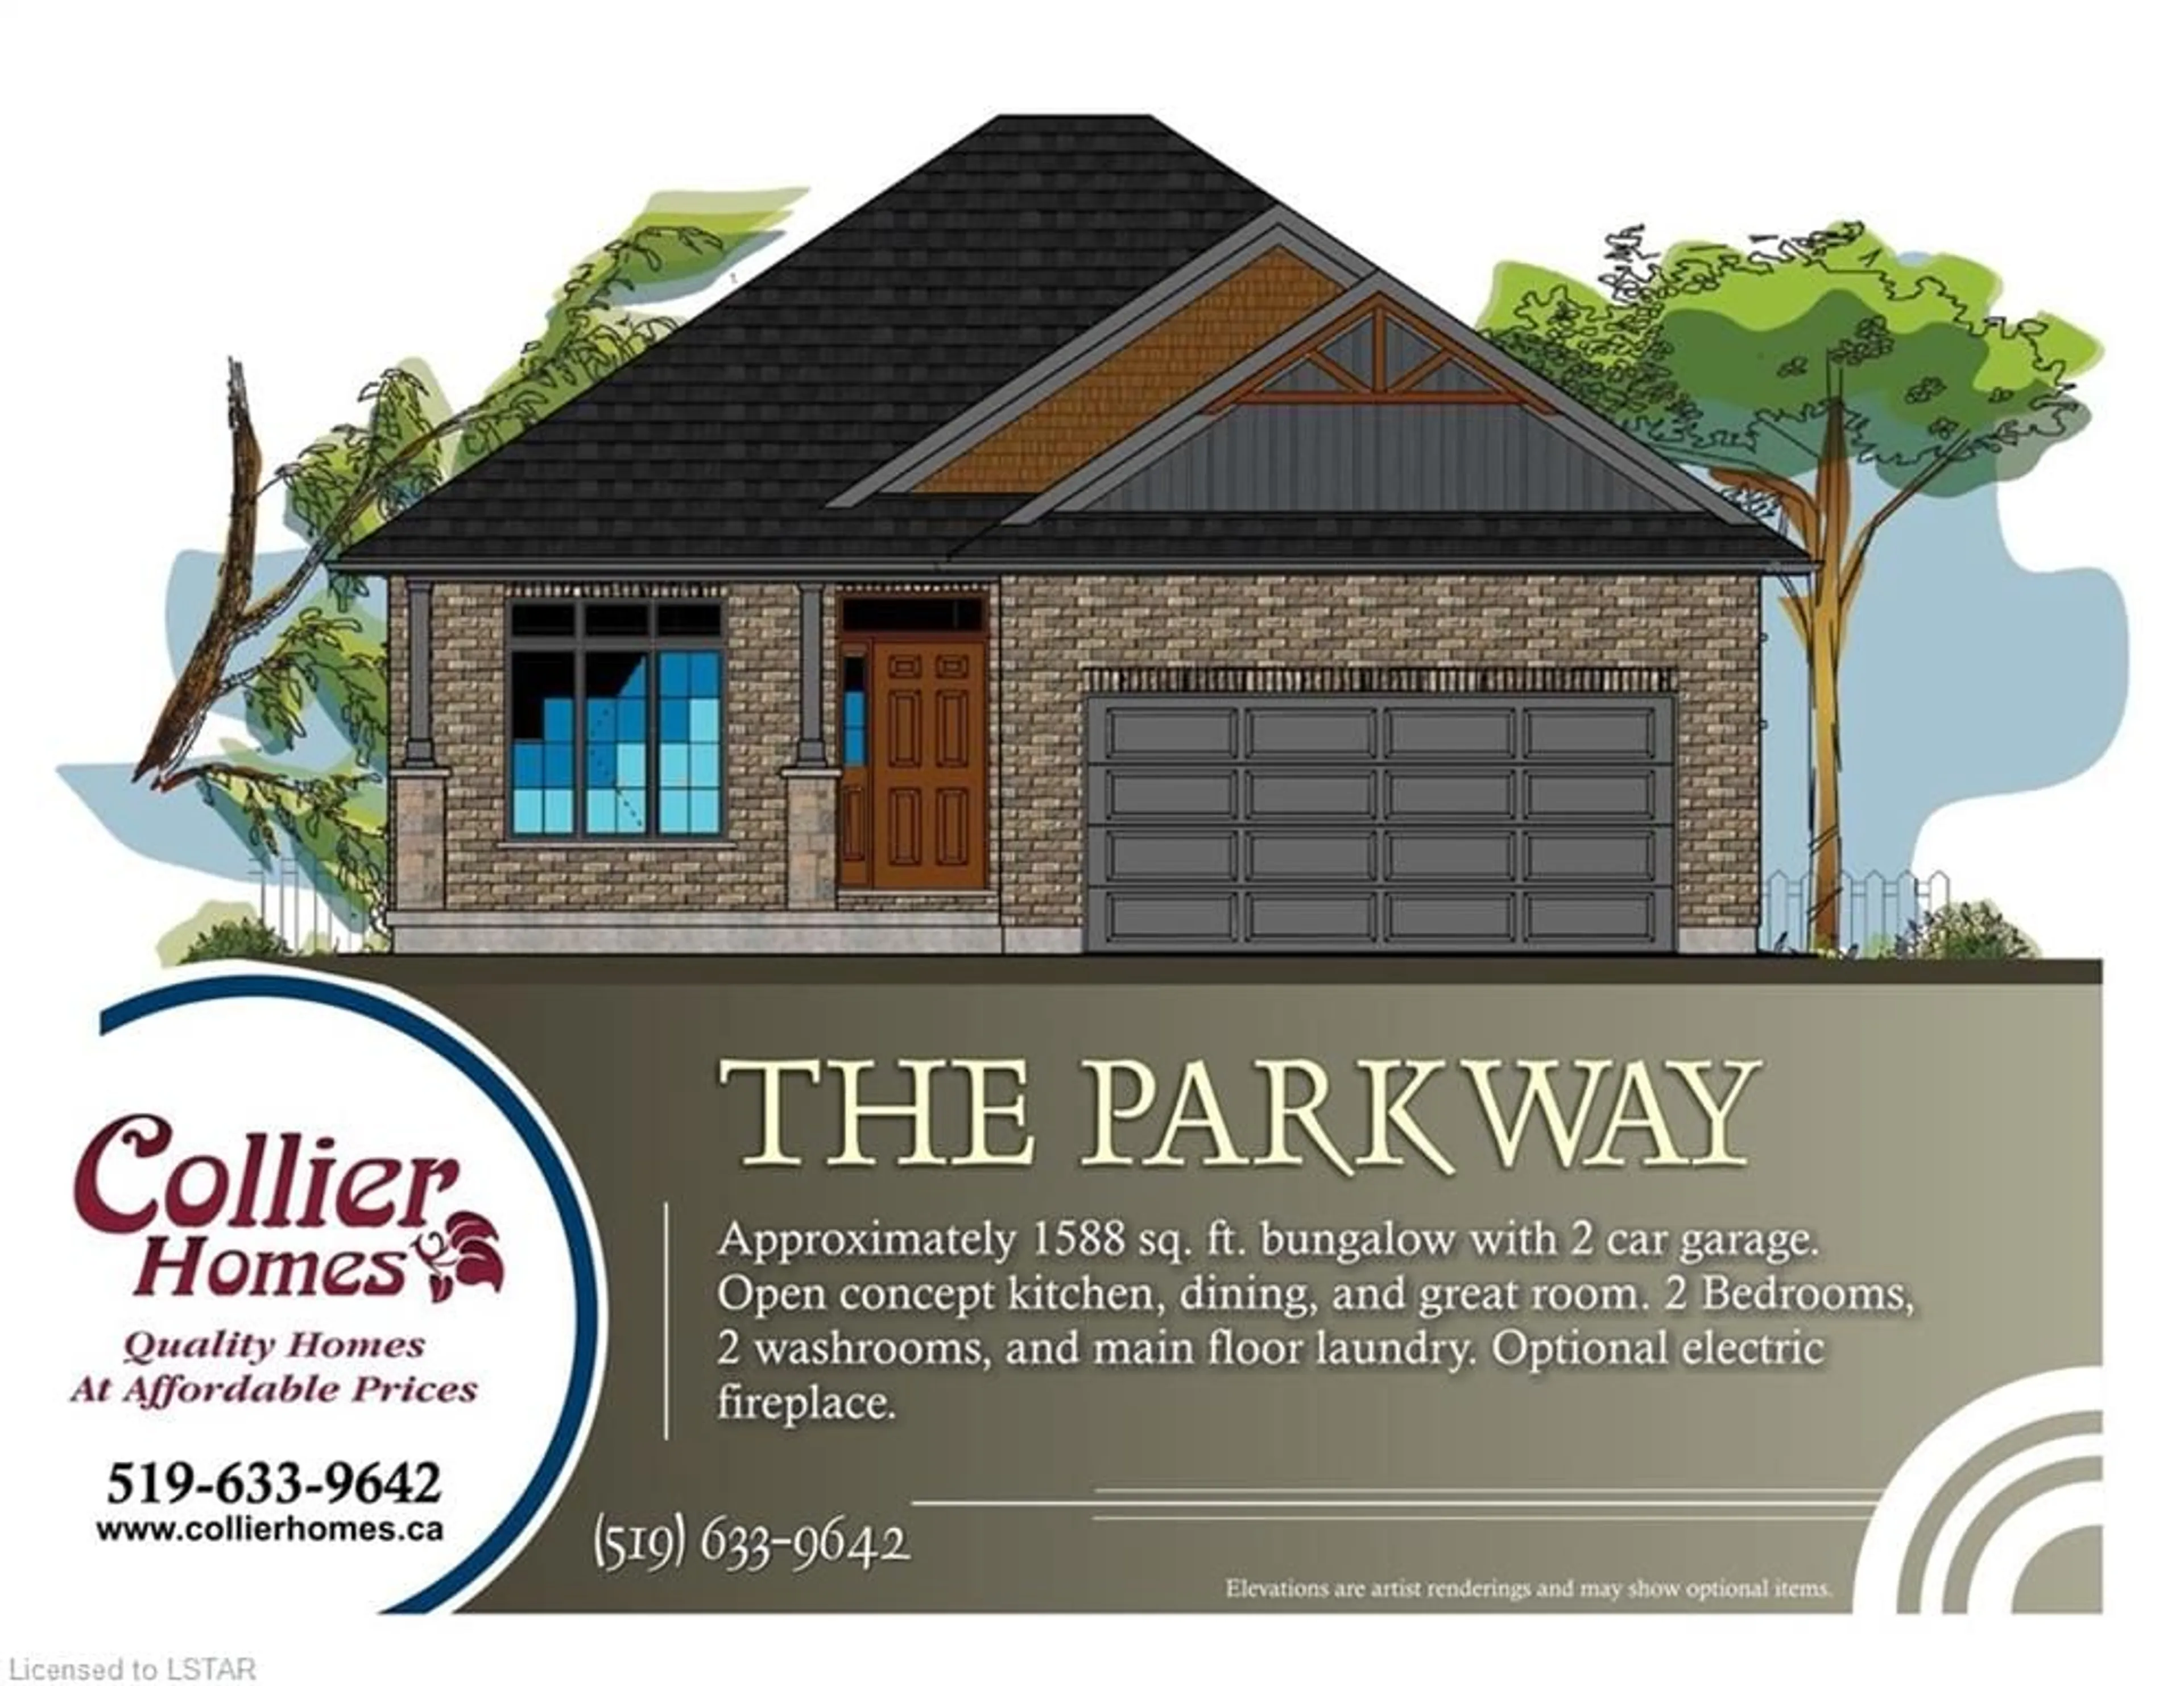 Home with brick exterior material for 106 Aspen Pky #4, Aylmer Ontario N5H 3H7